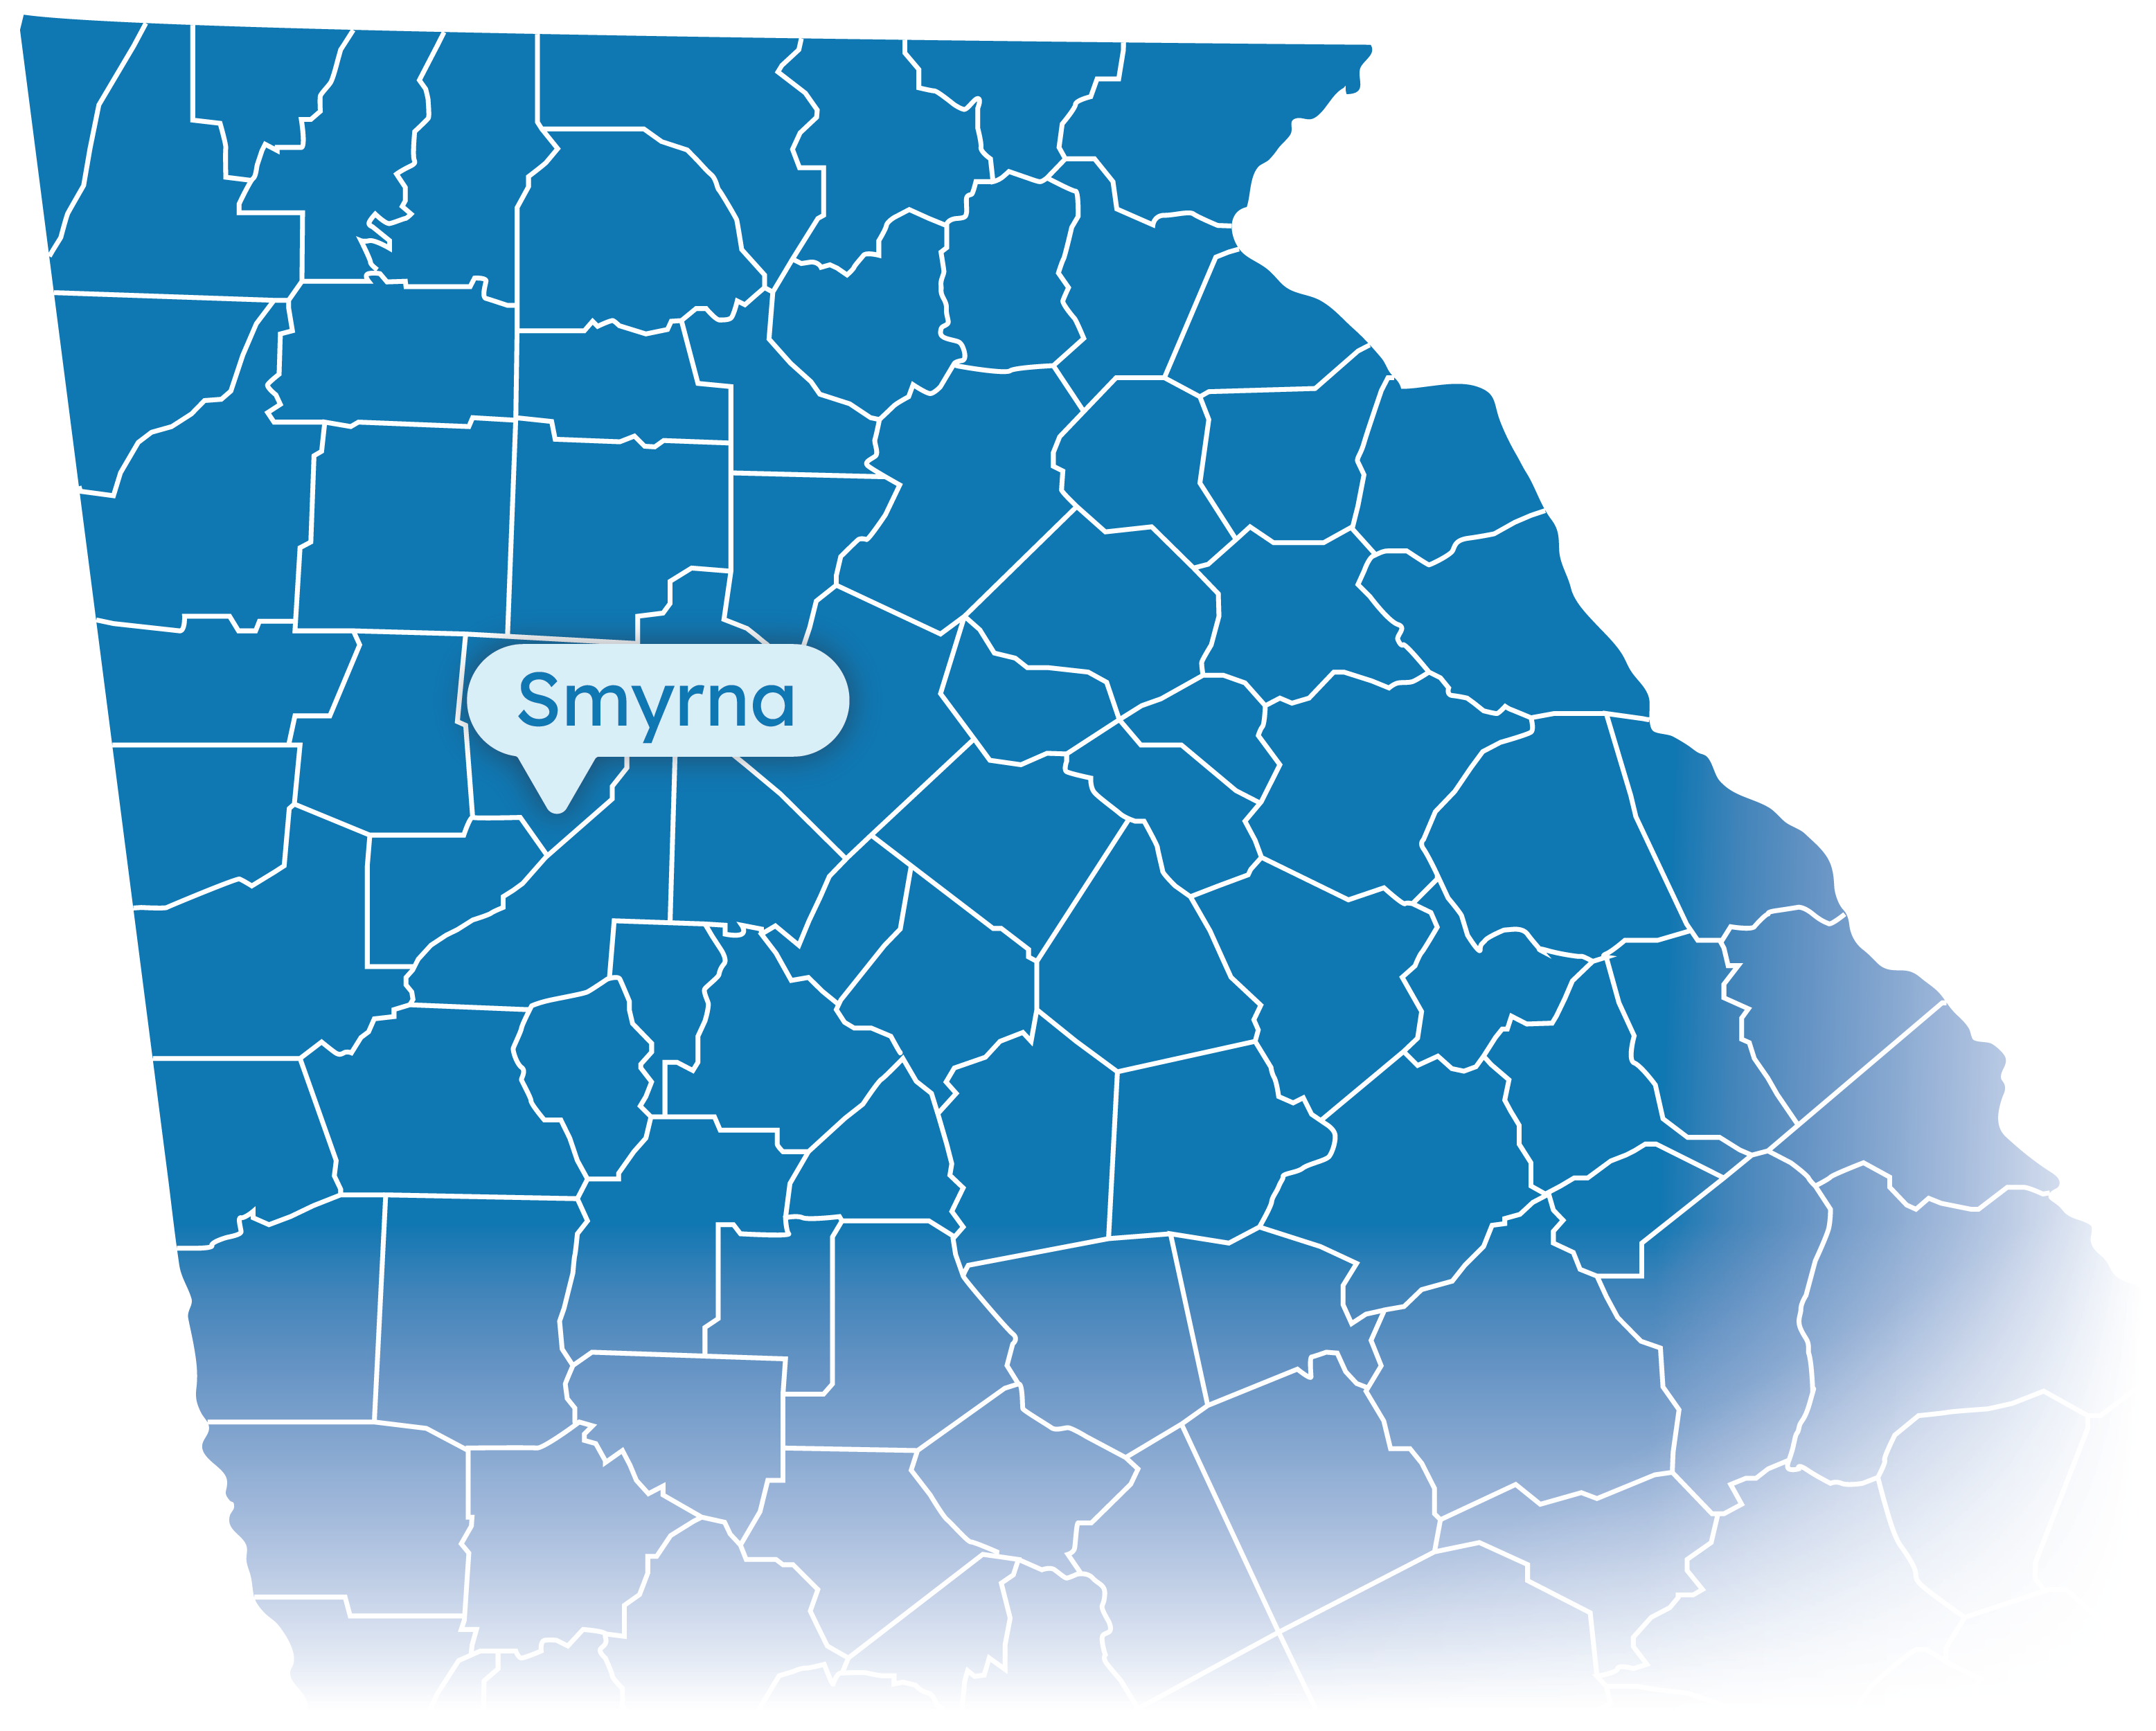 Map of Georgia with Smyrna highlighted